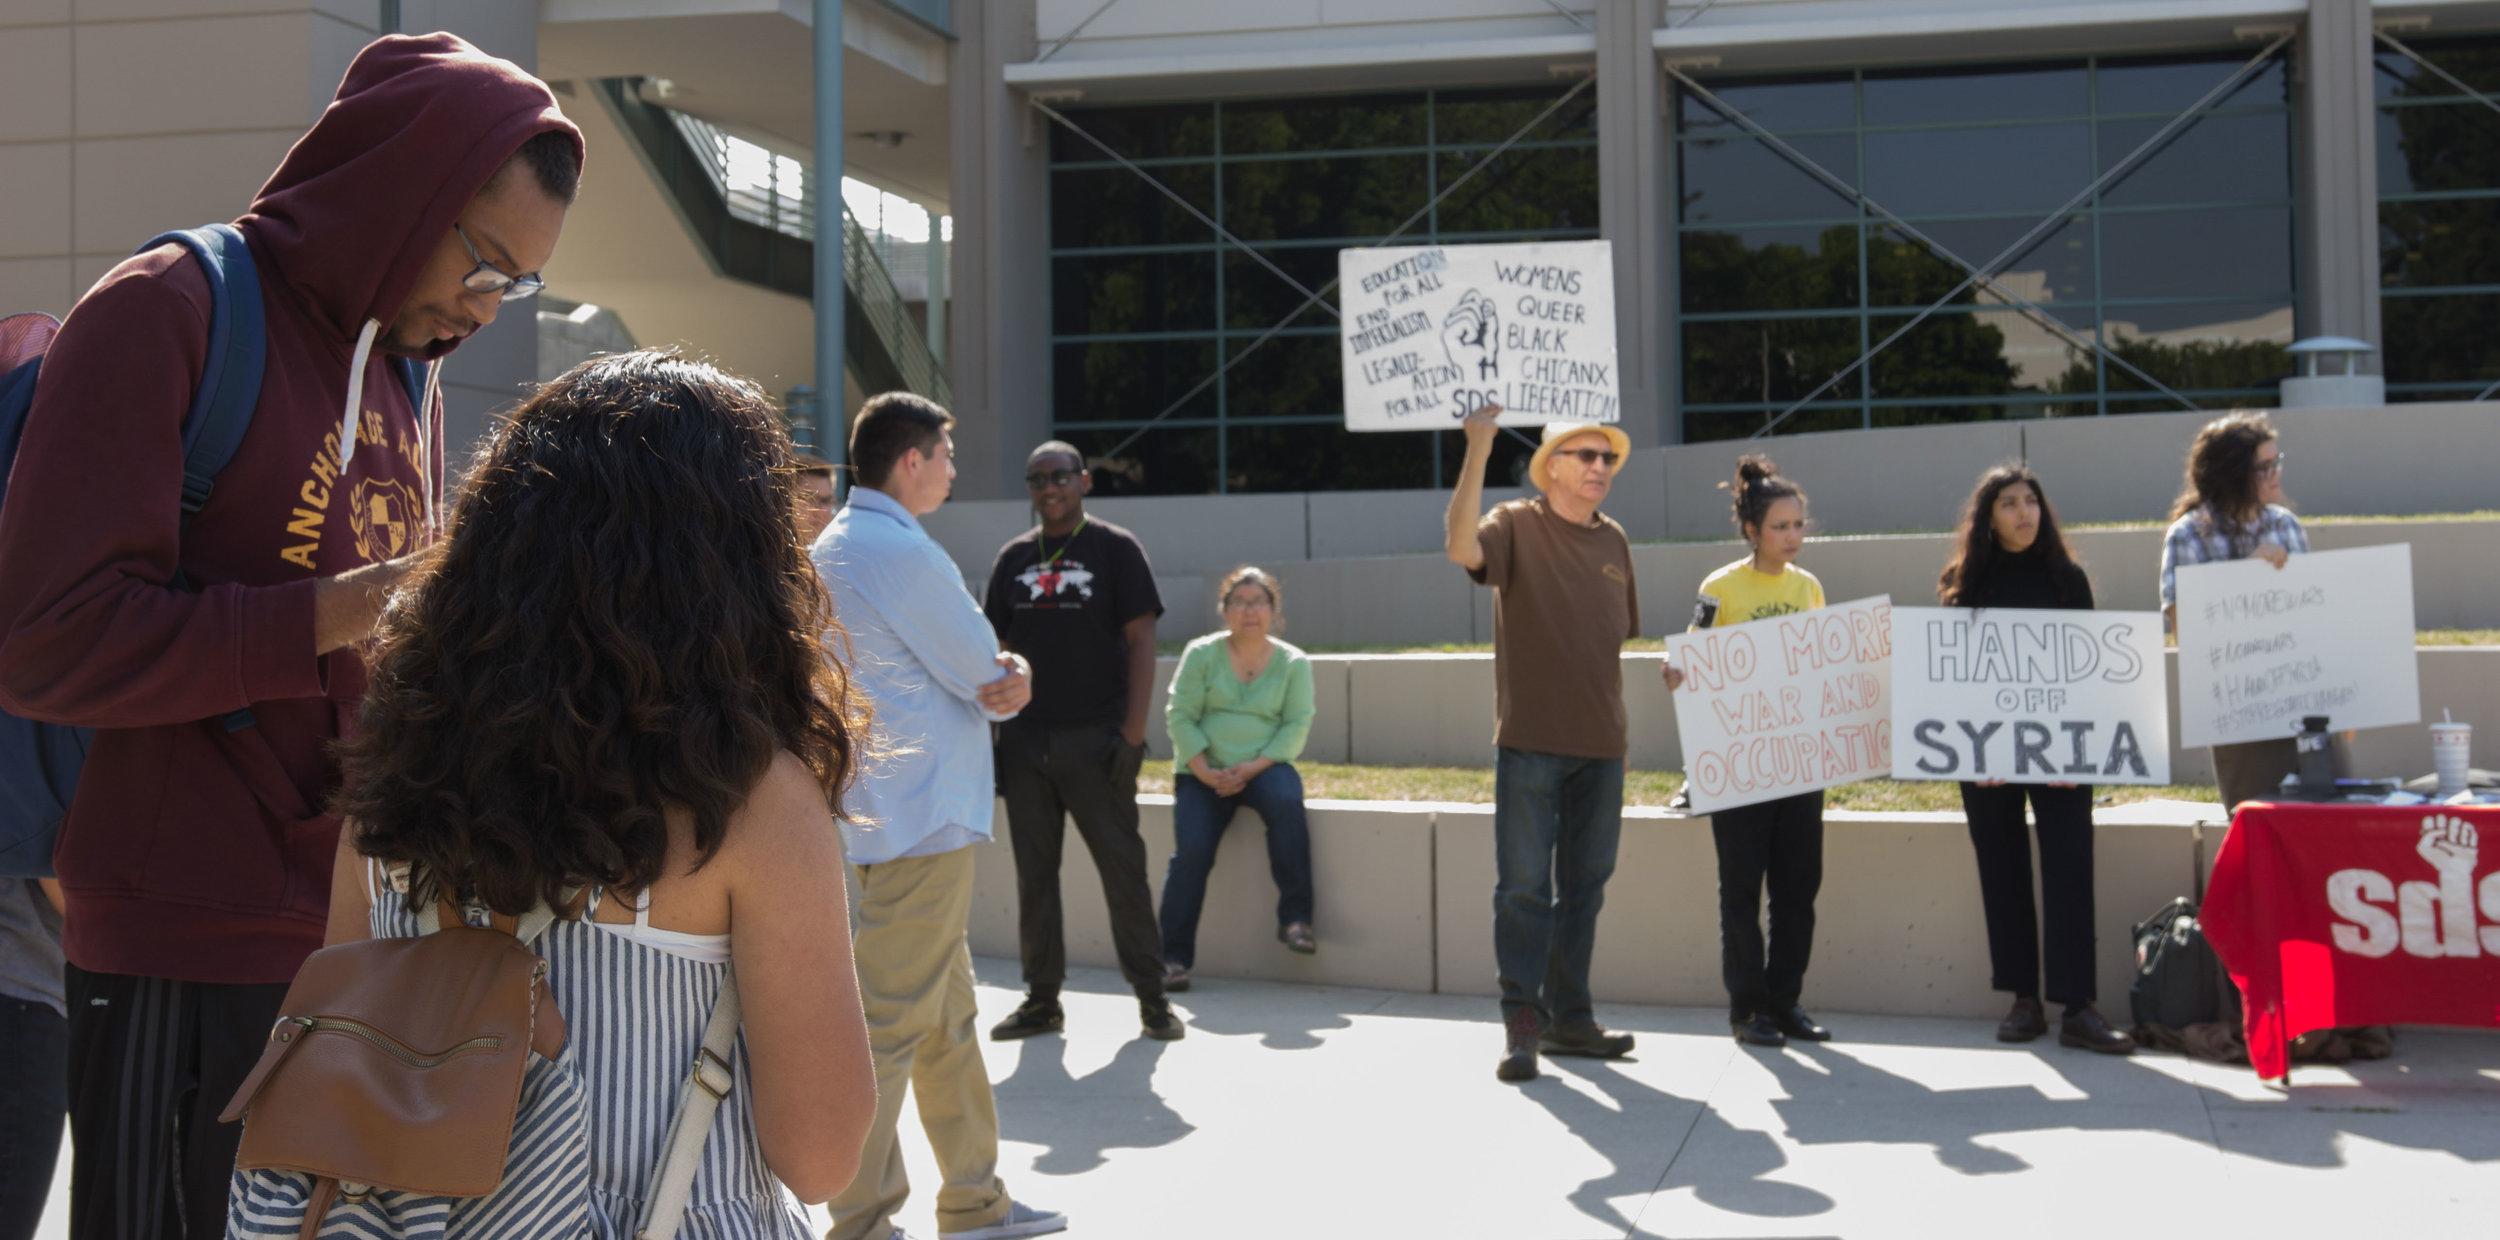  A crowd gathers to gain information and show support at the Hands Off Syria protest at Pasadena City College in Pasadena California on April 11, 2017 (Photo By: Zane Meyer-Thornton) 